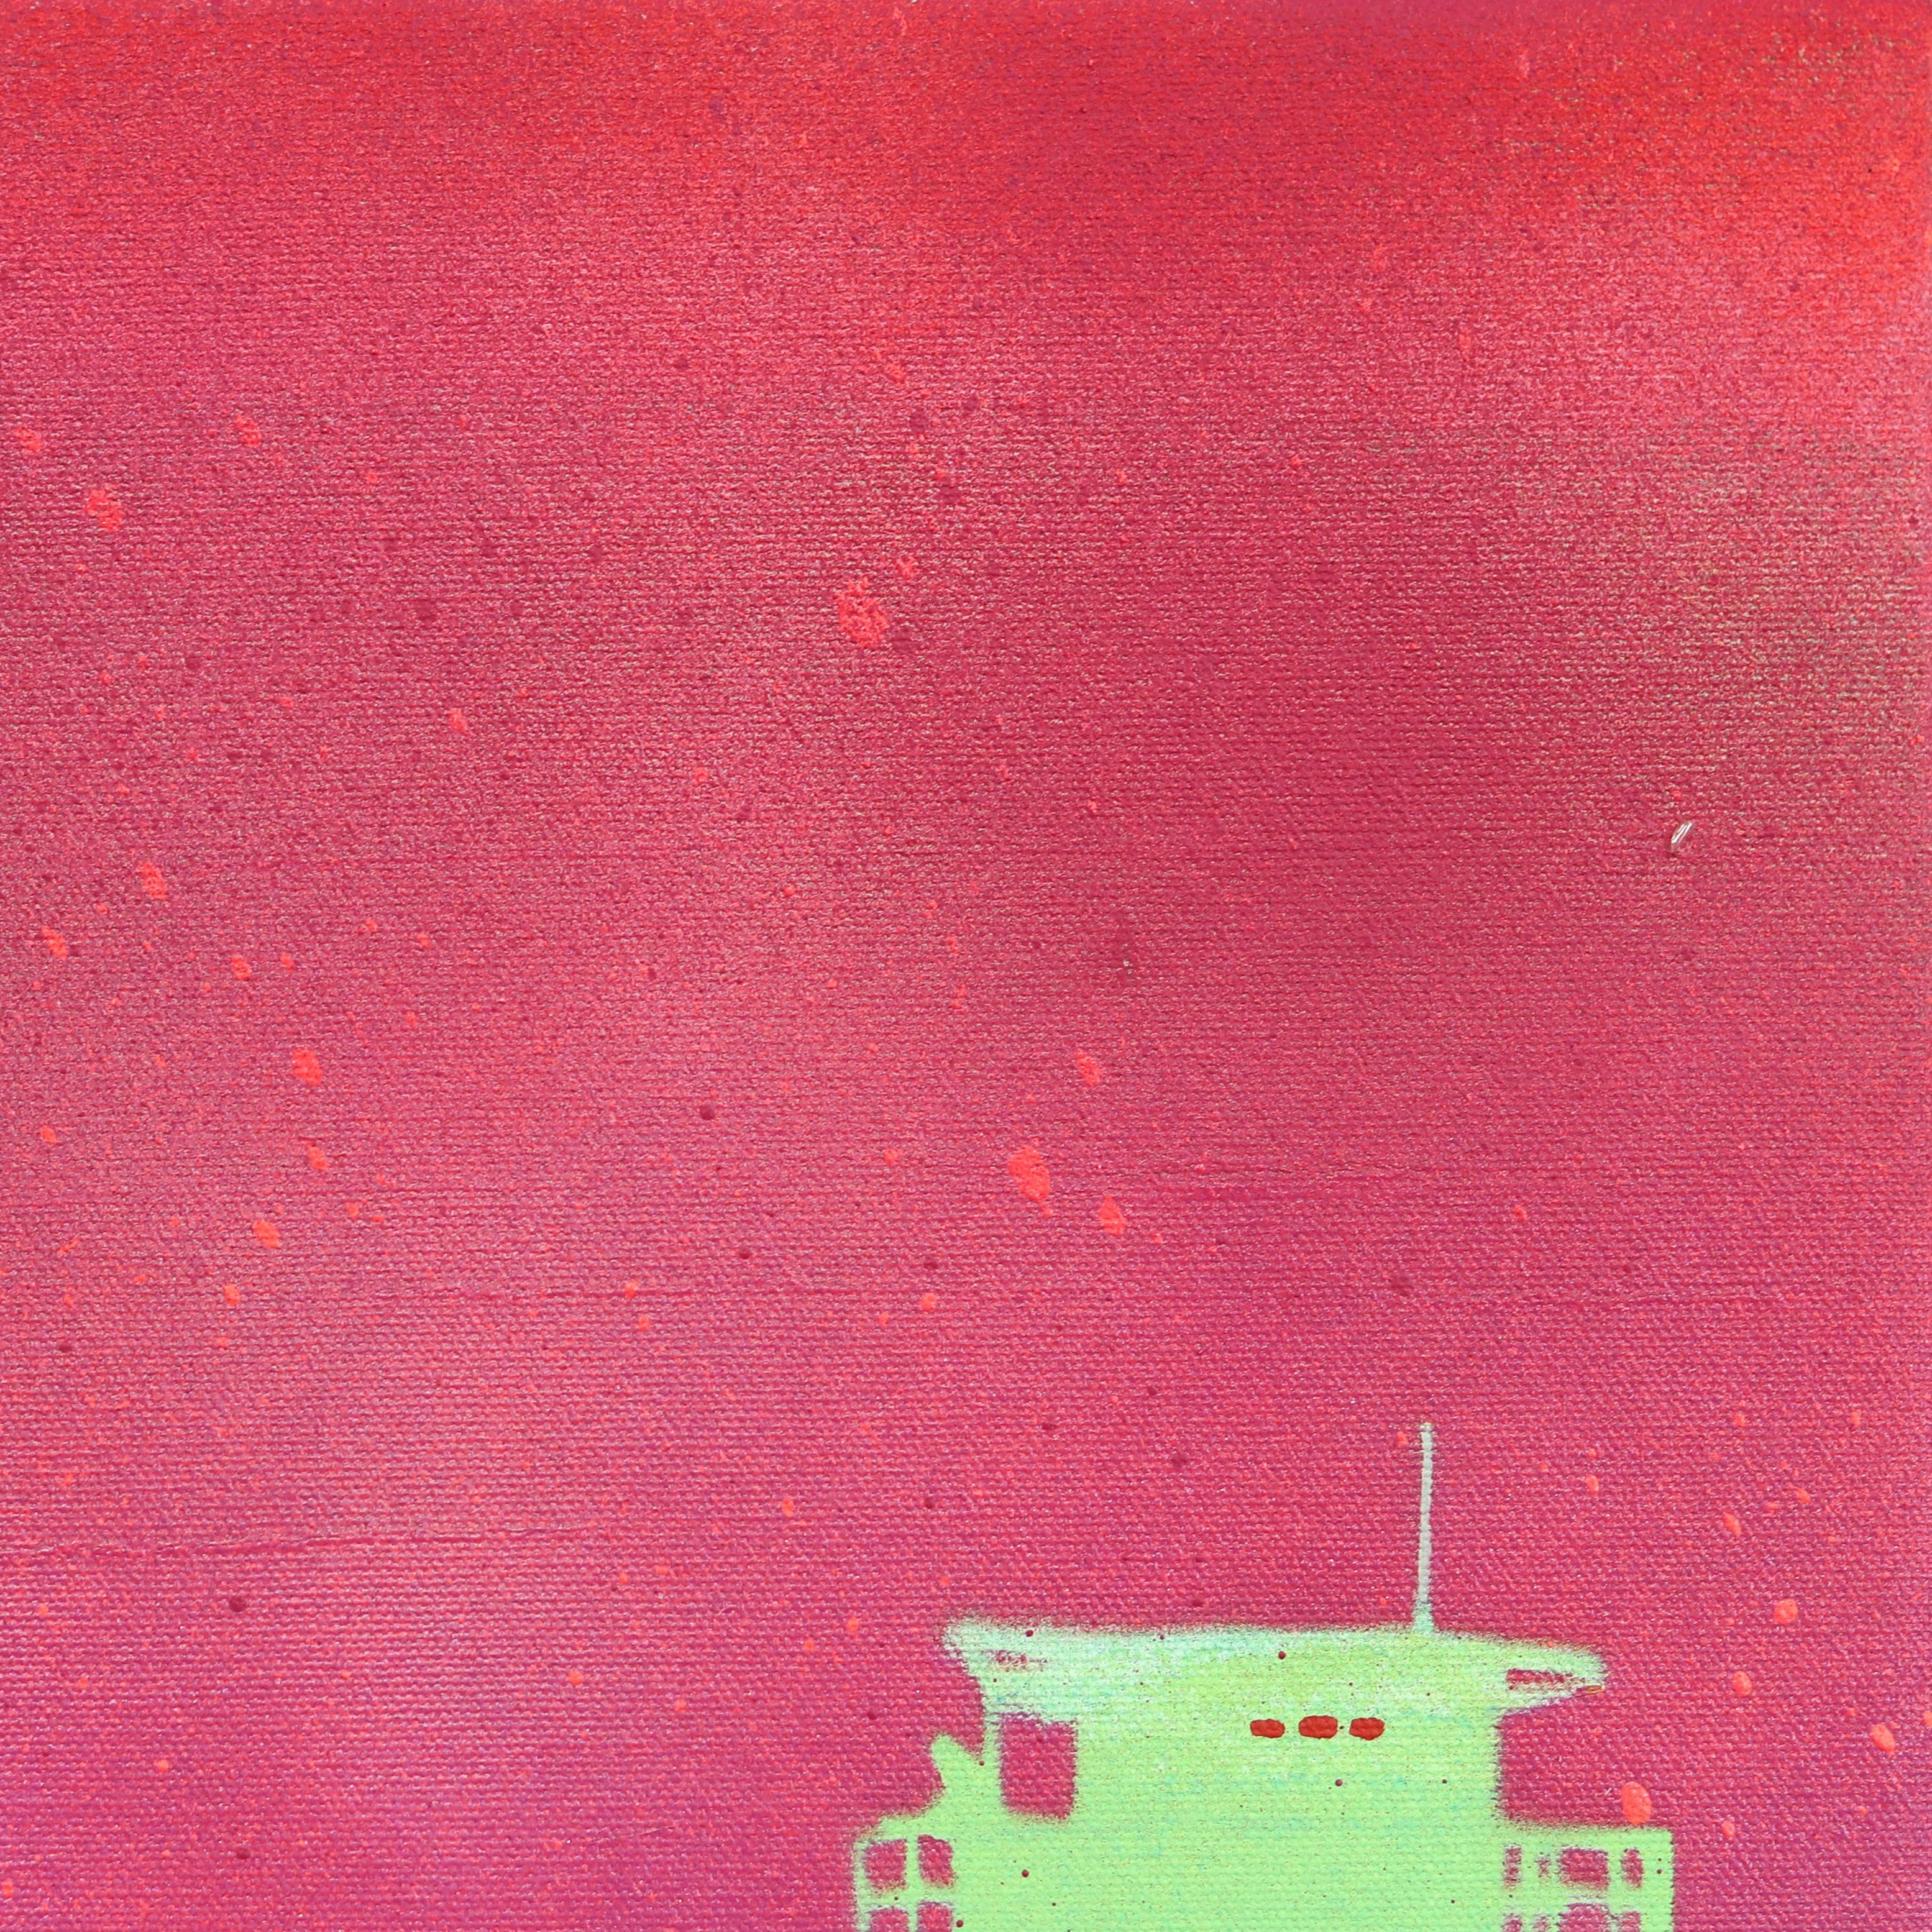 Feeling Pink - Lifeguard Stand on Beach Original Pop Art Oceanscape Sky Painting For Sale 3